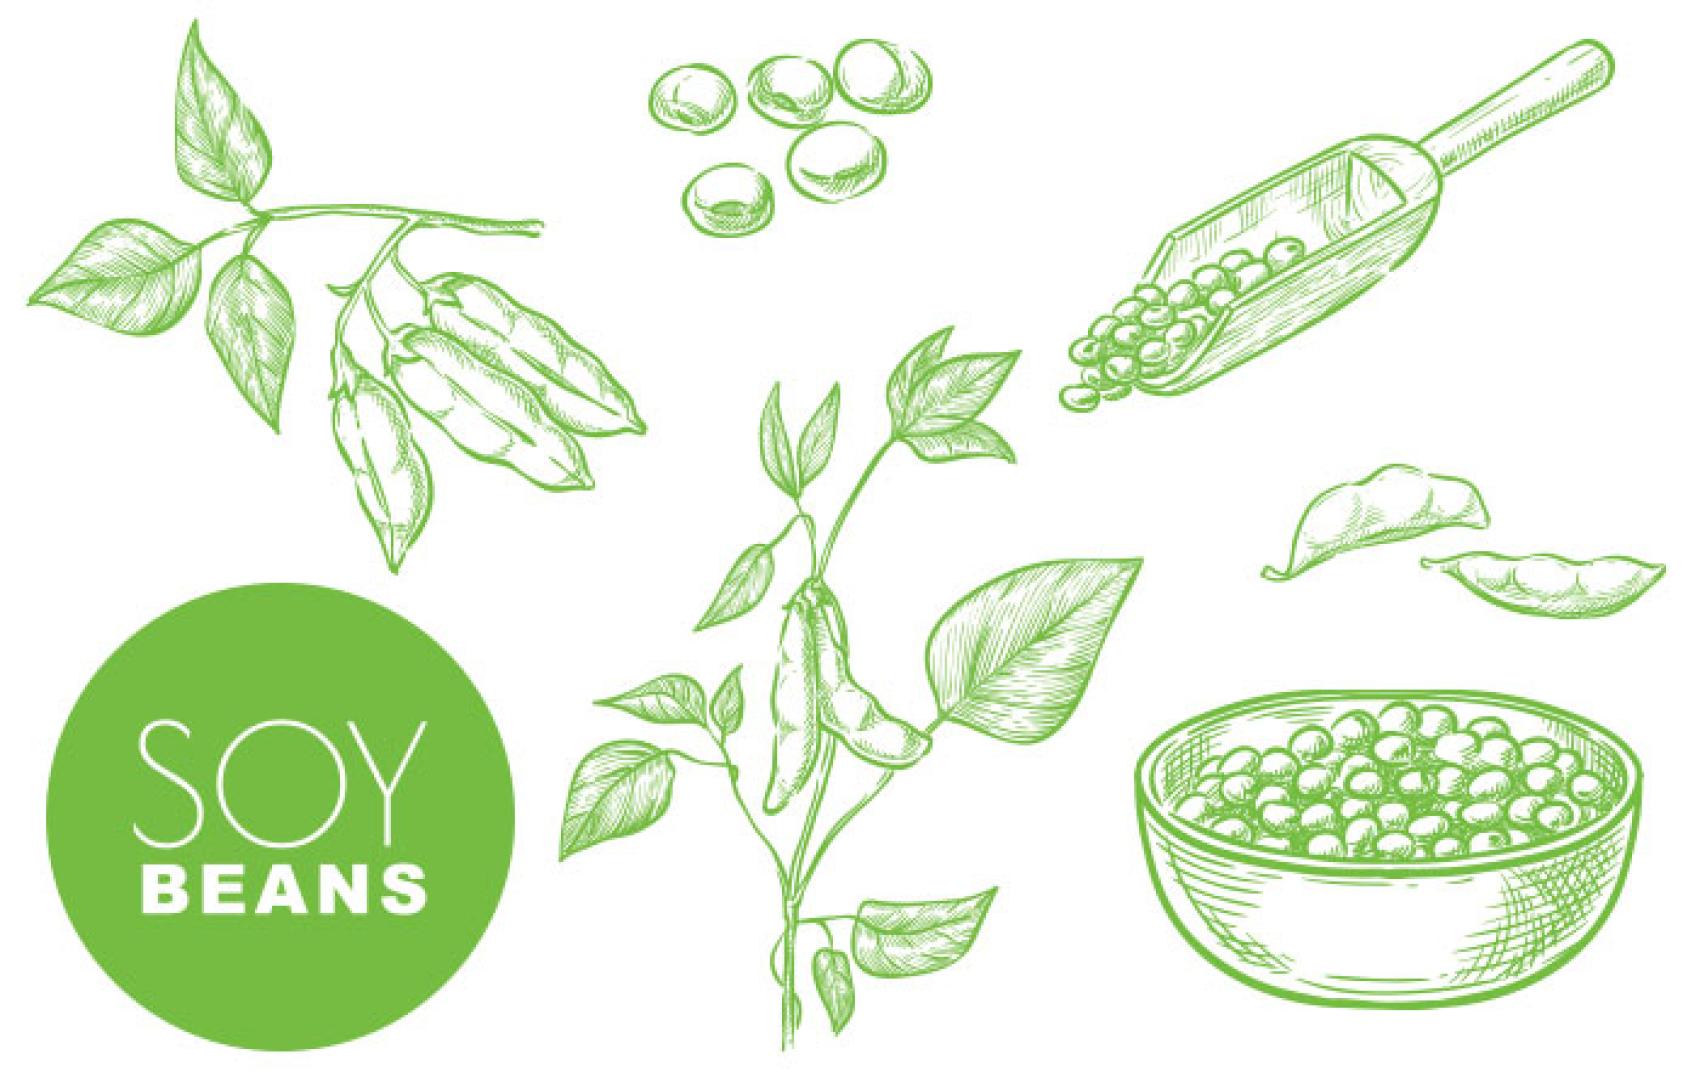 Everything About Soya: A Comprehensive Guide to Soybeans - Soya Food